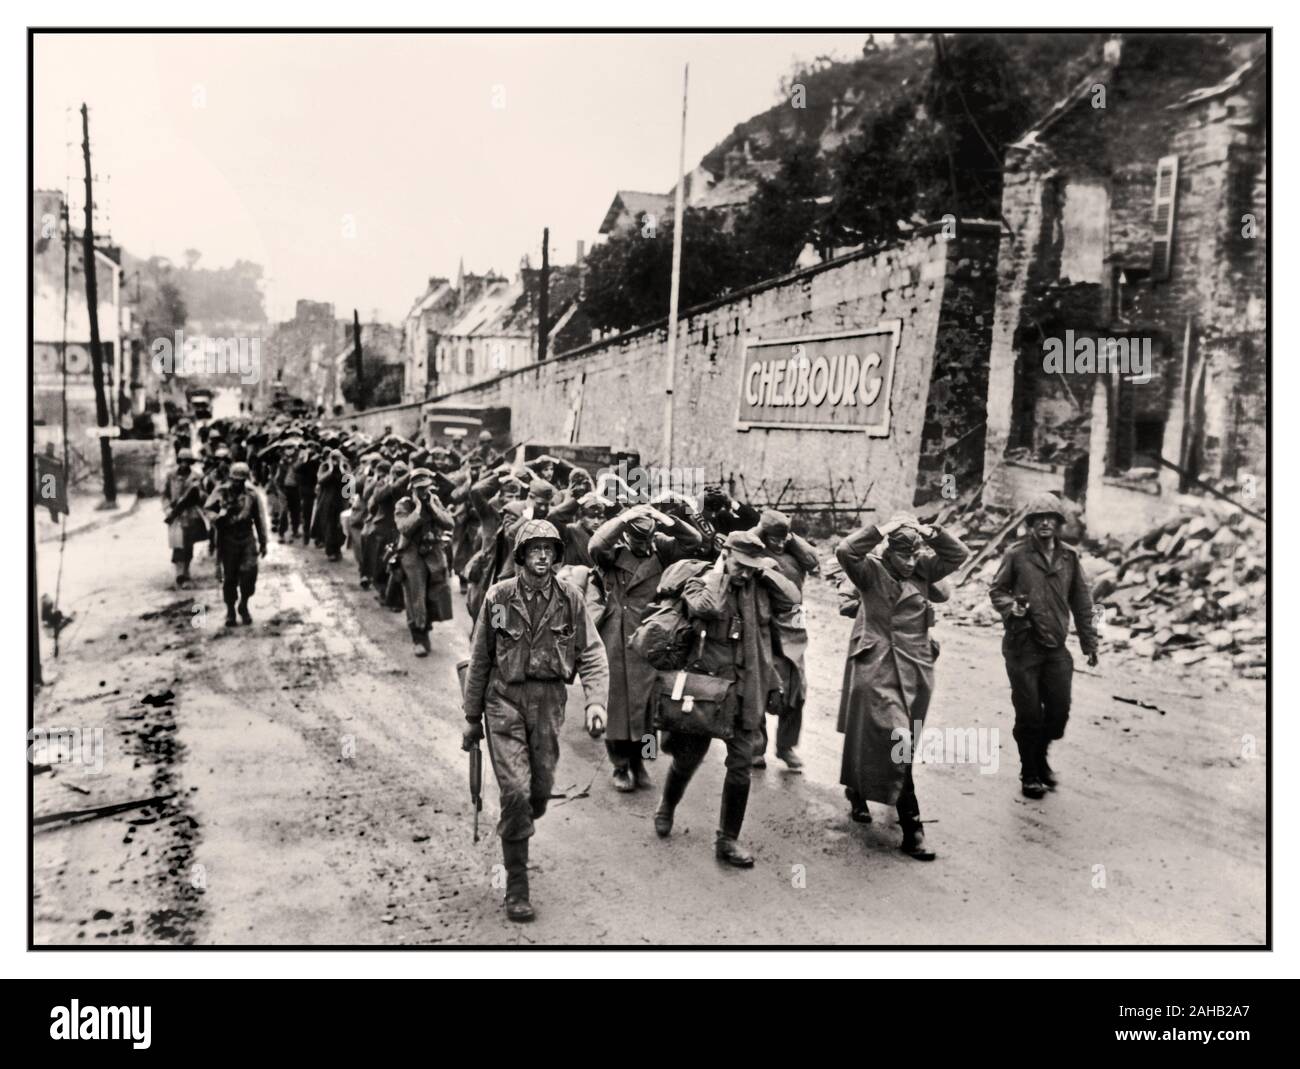 World War II June 1944  German Wehrmacht army captured and surrendered soldiers with hands on heads after operation overlord D-Day offensive marching with American allied troops through a street in Cherbourg, France, WW2 Second World War France German Surrender Hands on heads Stock Photo